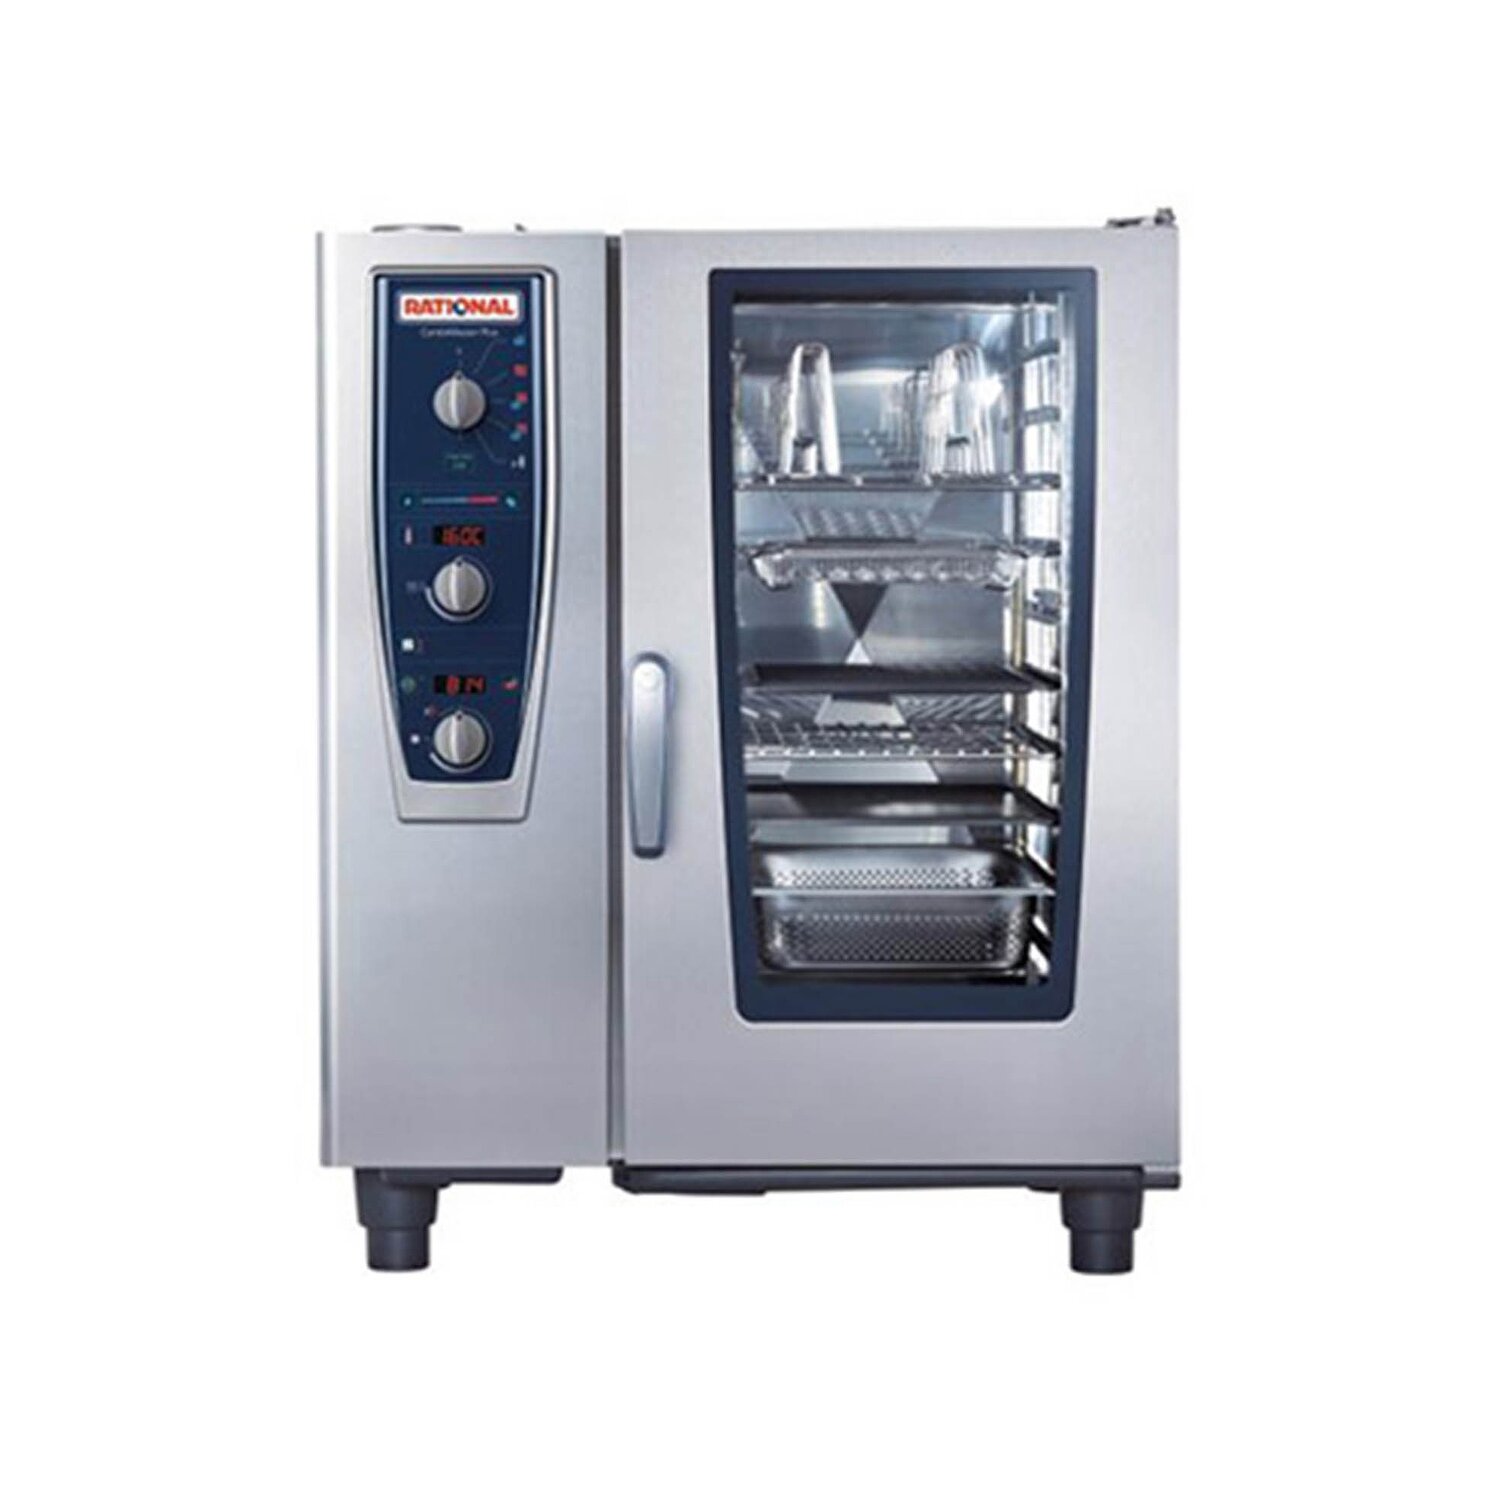 What Are Combi-Ovens Used For? - Club + Resort Chef